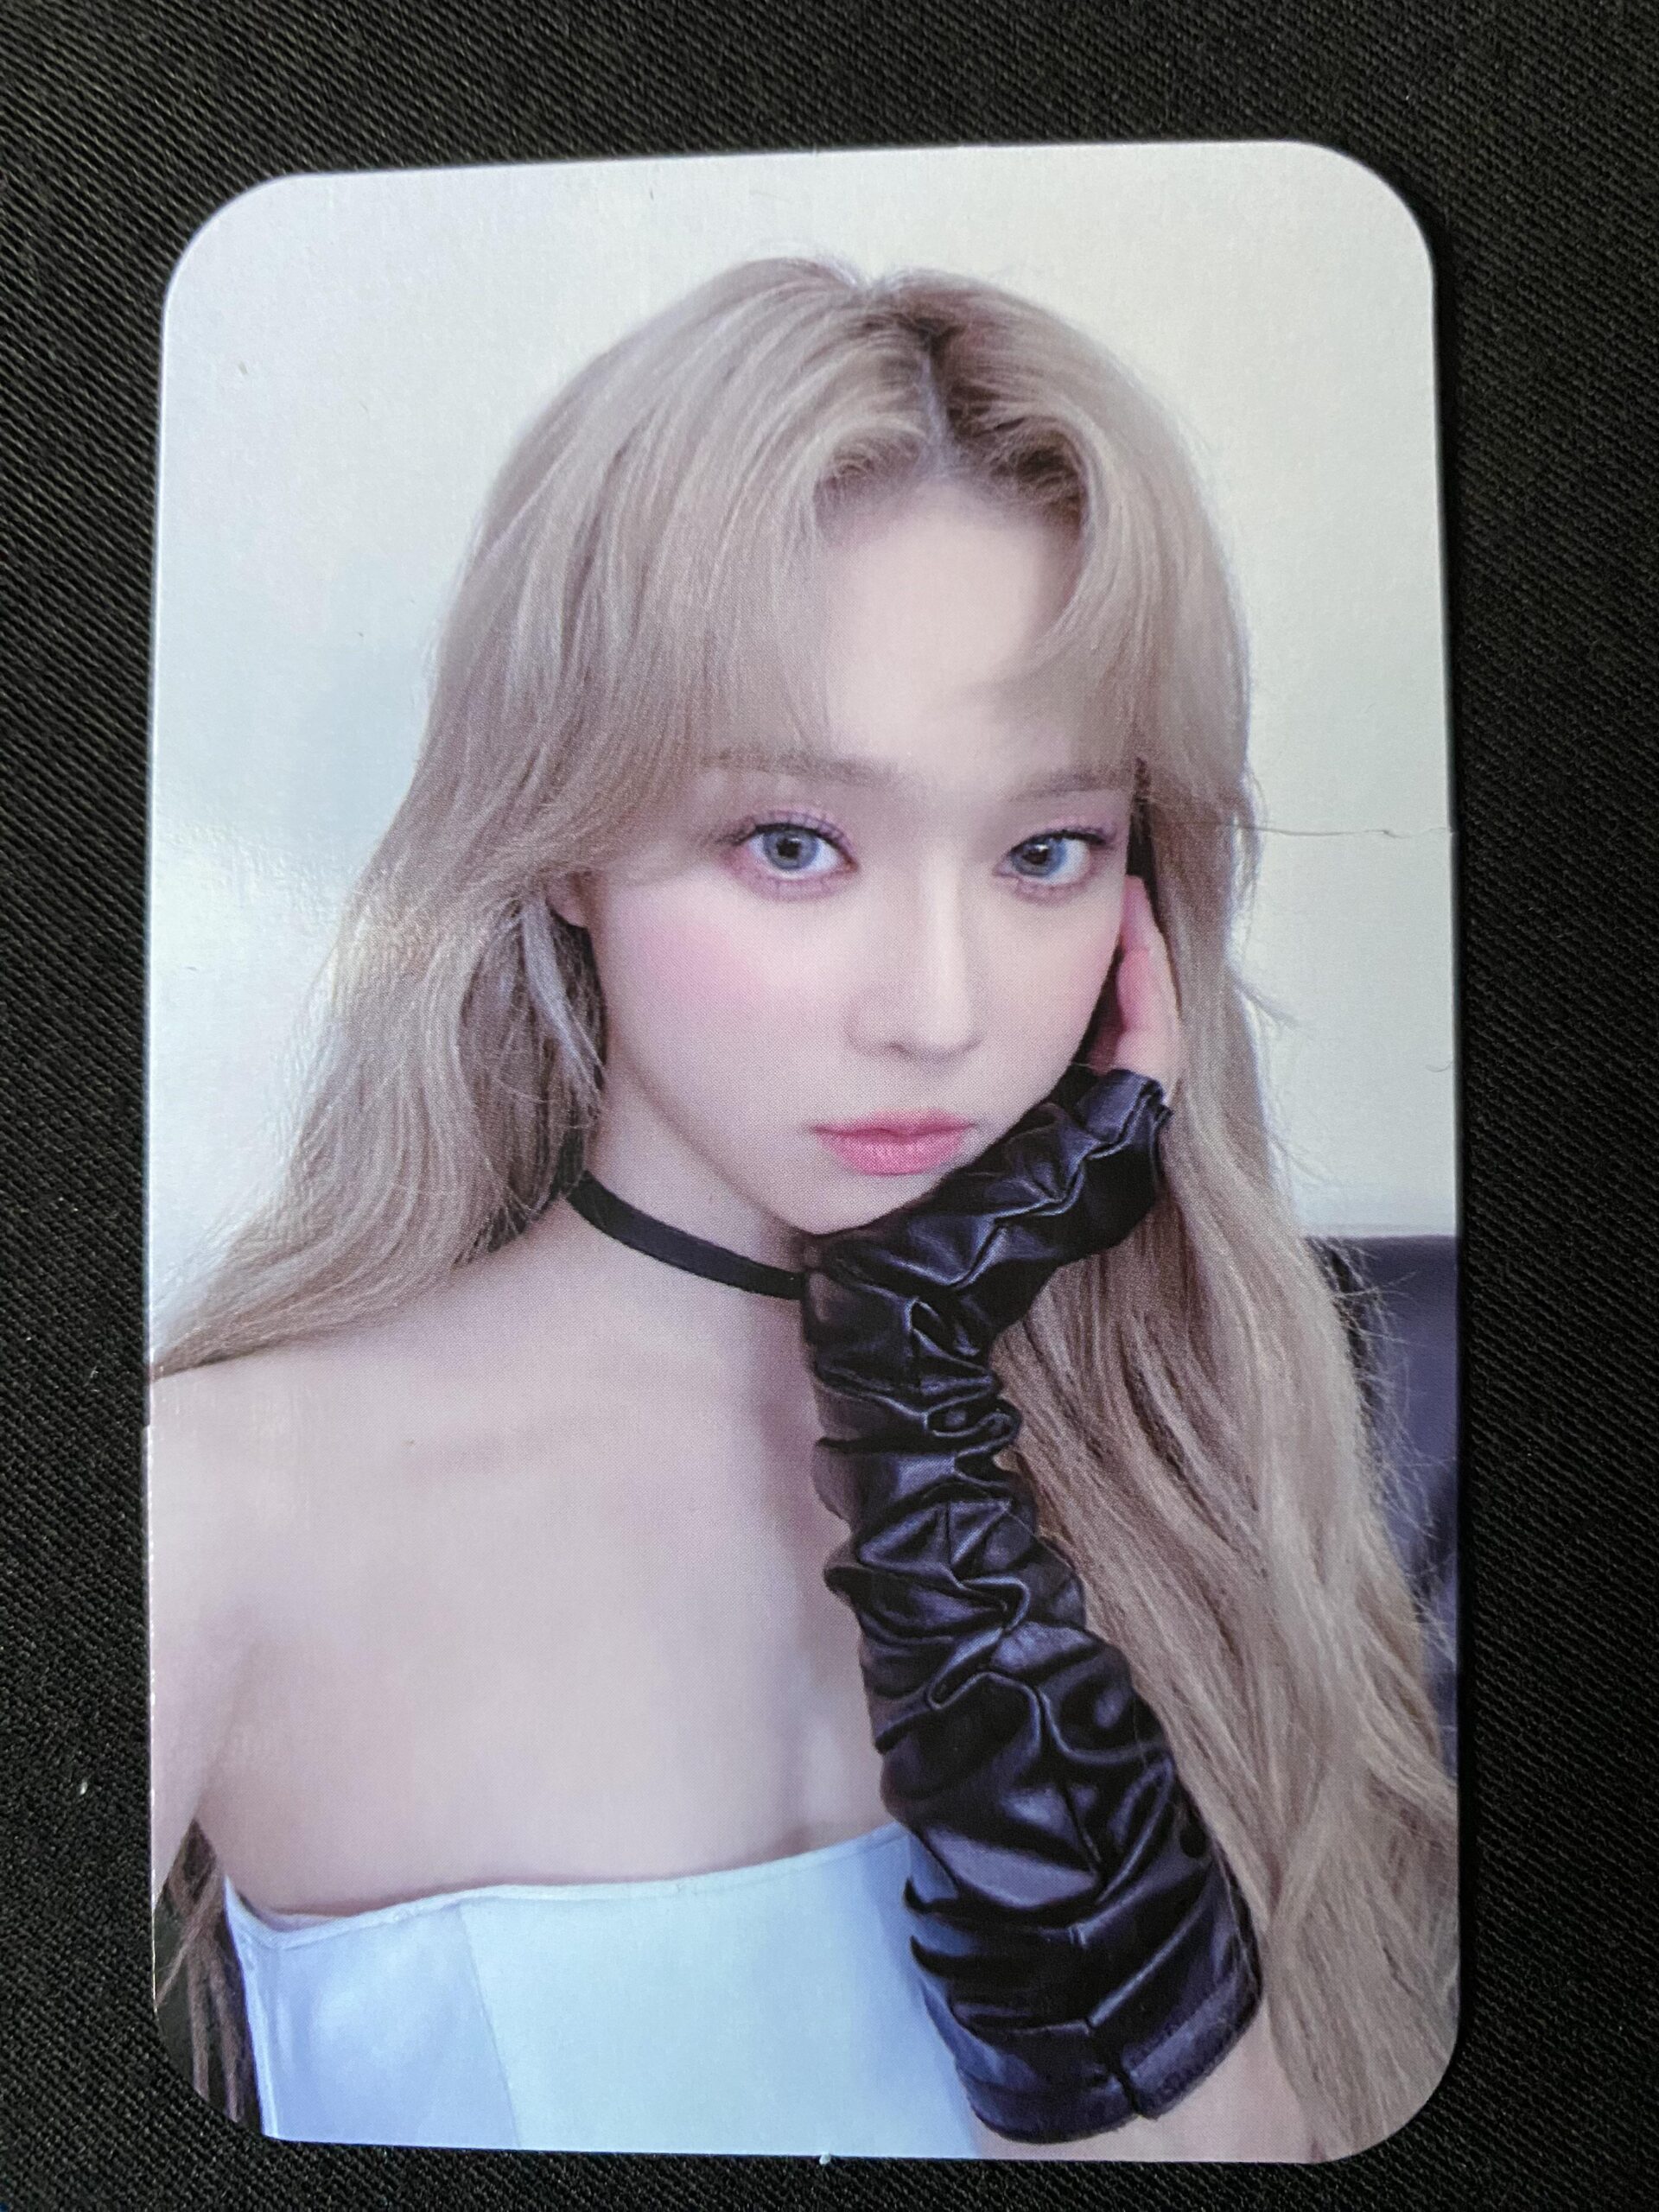 Is the photo card of Winter rare/valuable?